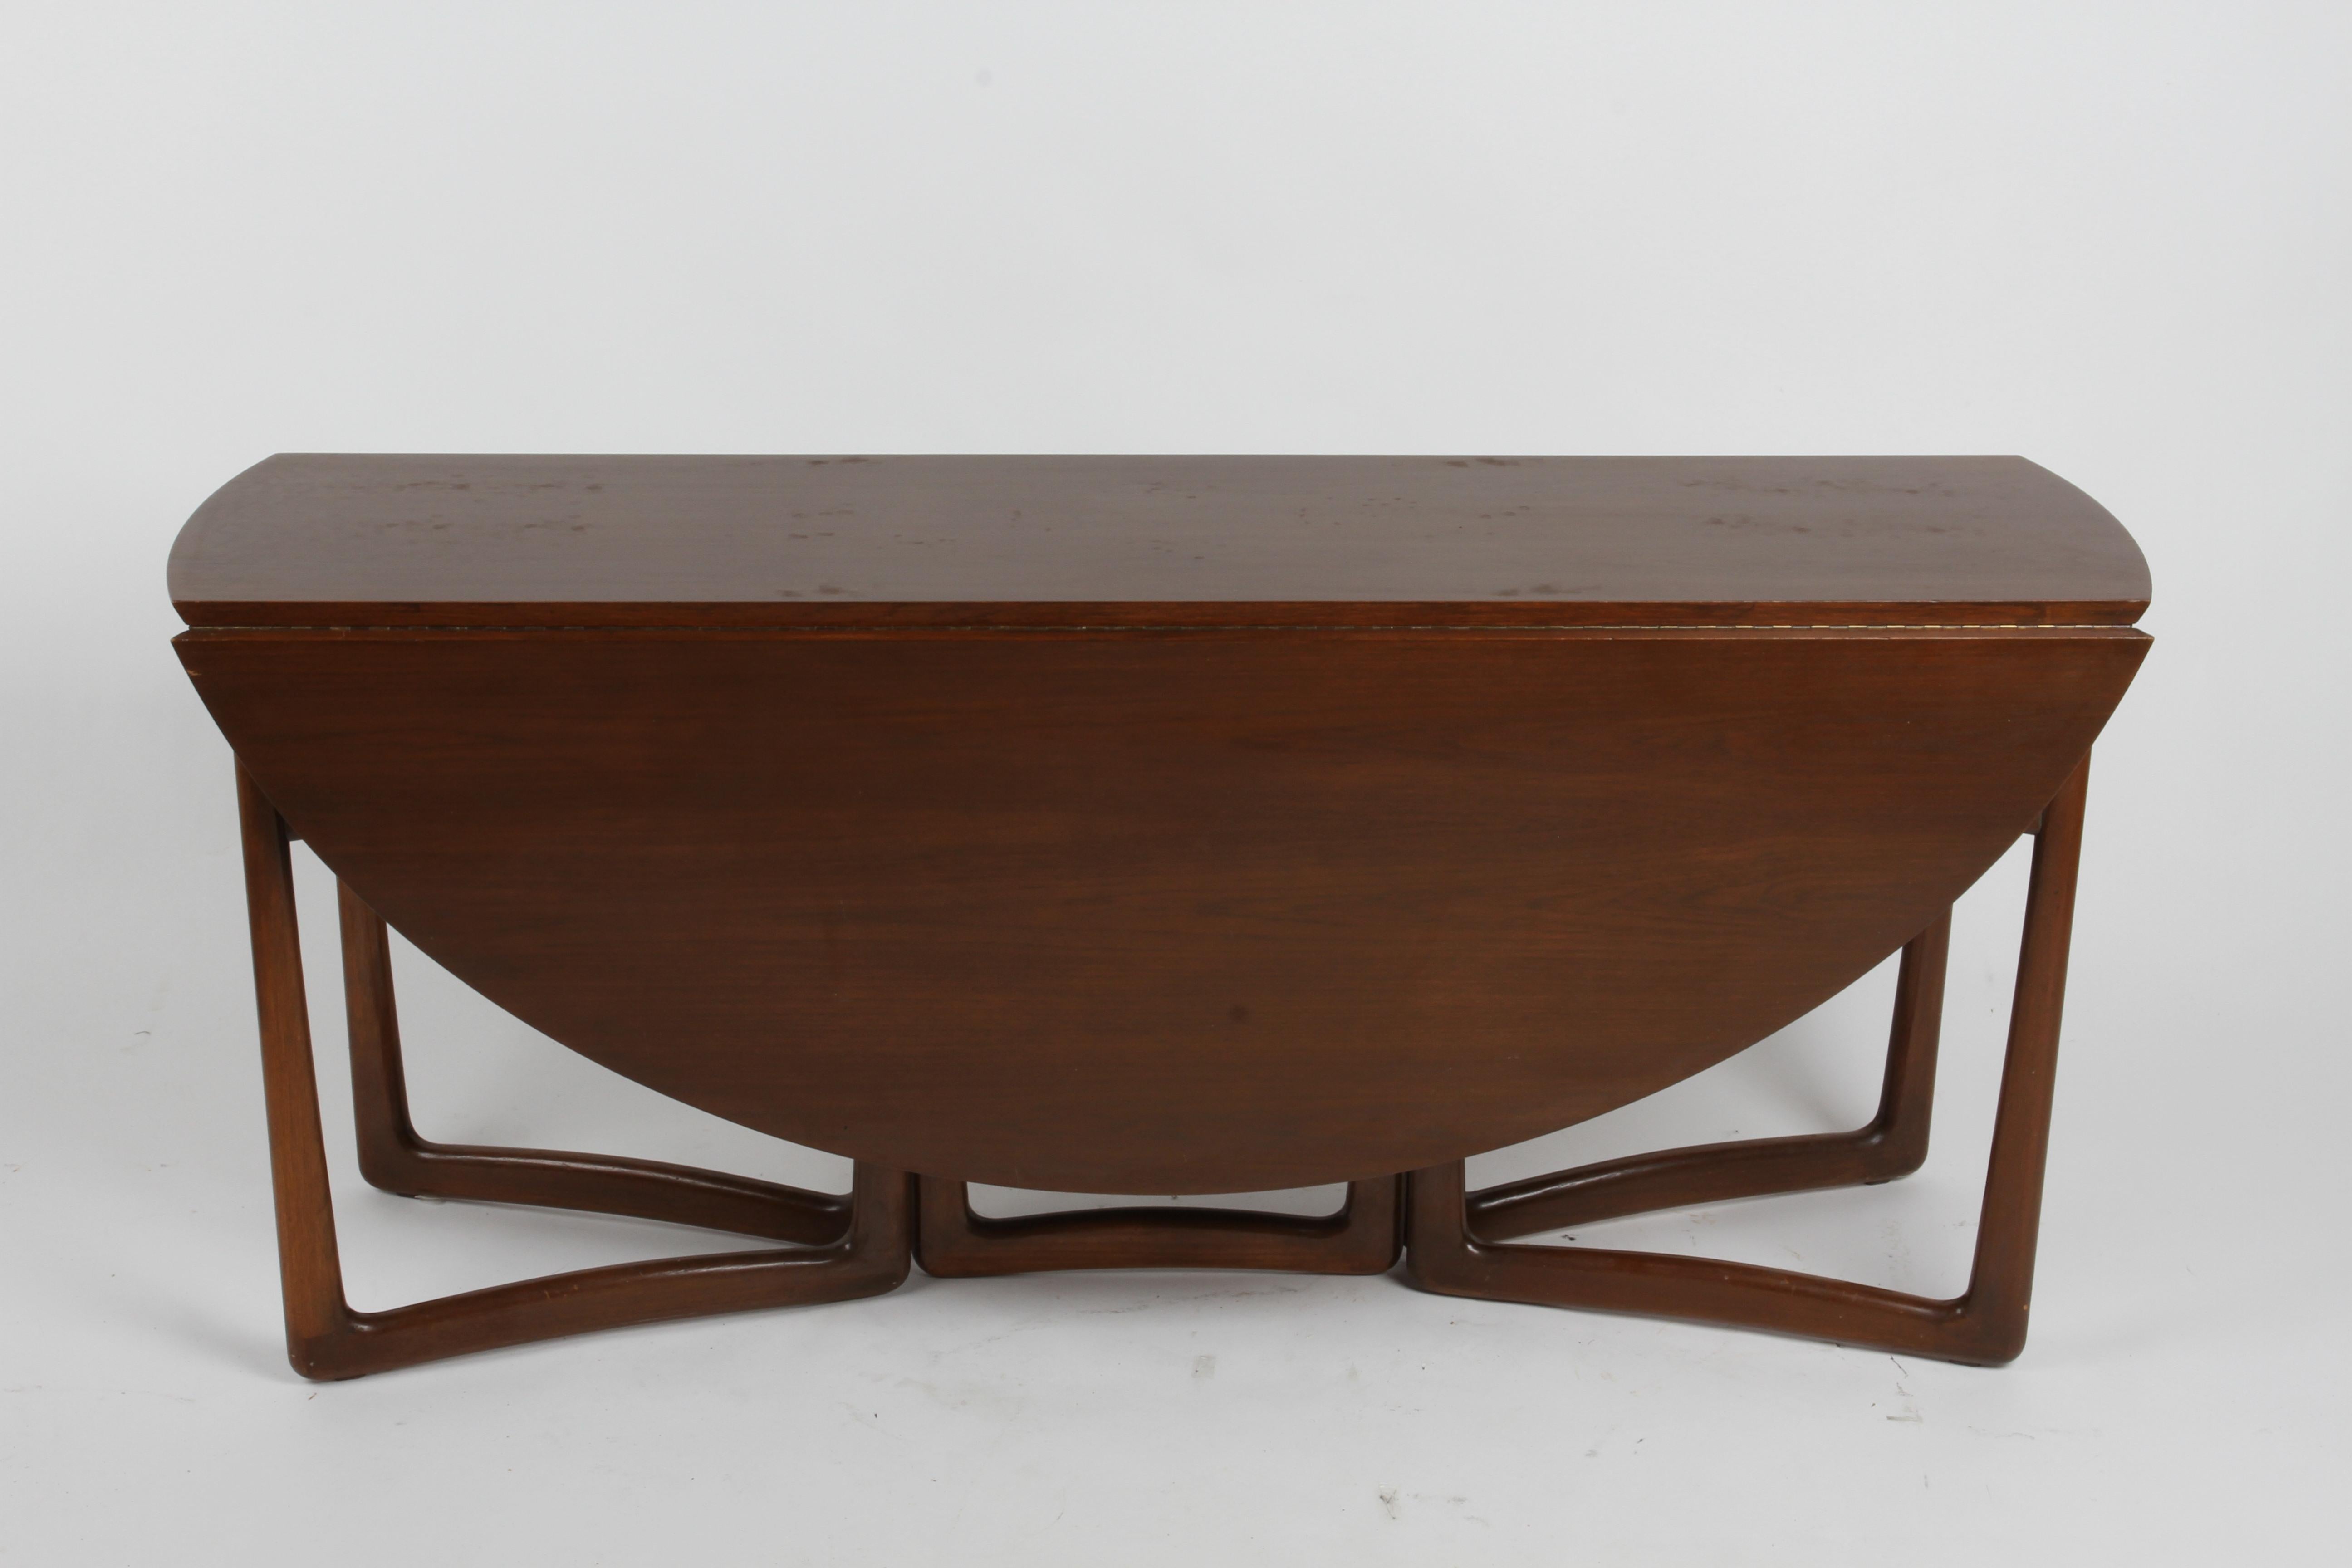 Beautiful 1960s teak drop-leaf table designed by Peter Hvidt and Orla Mølgaard Nielsen for France & Sons and imported by John Stuart Inc. The sculptural legs of this convertible table slide open easily to support the two drop leaves, and tuck in to